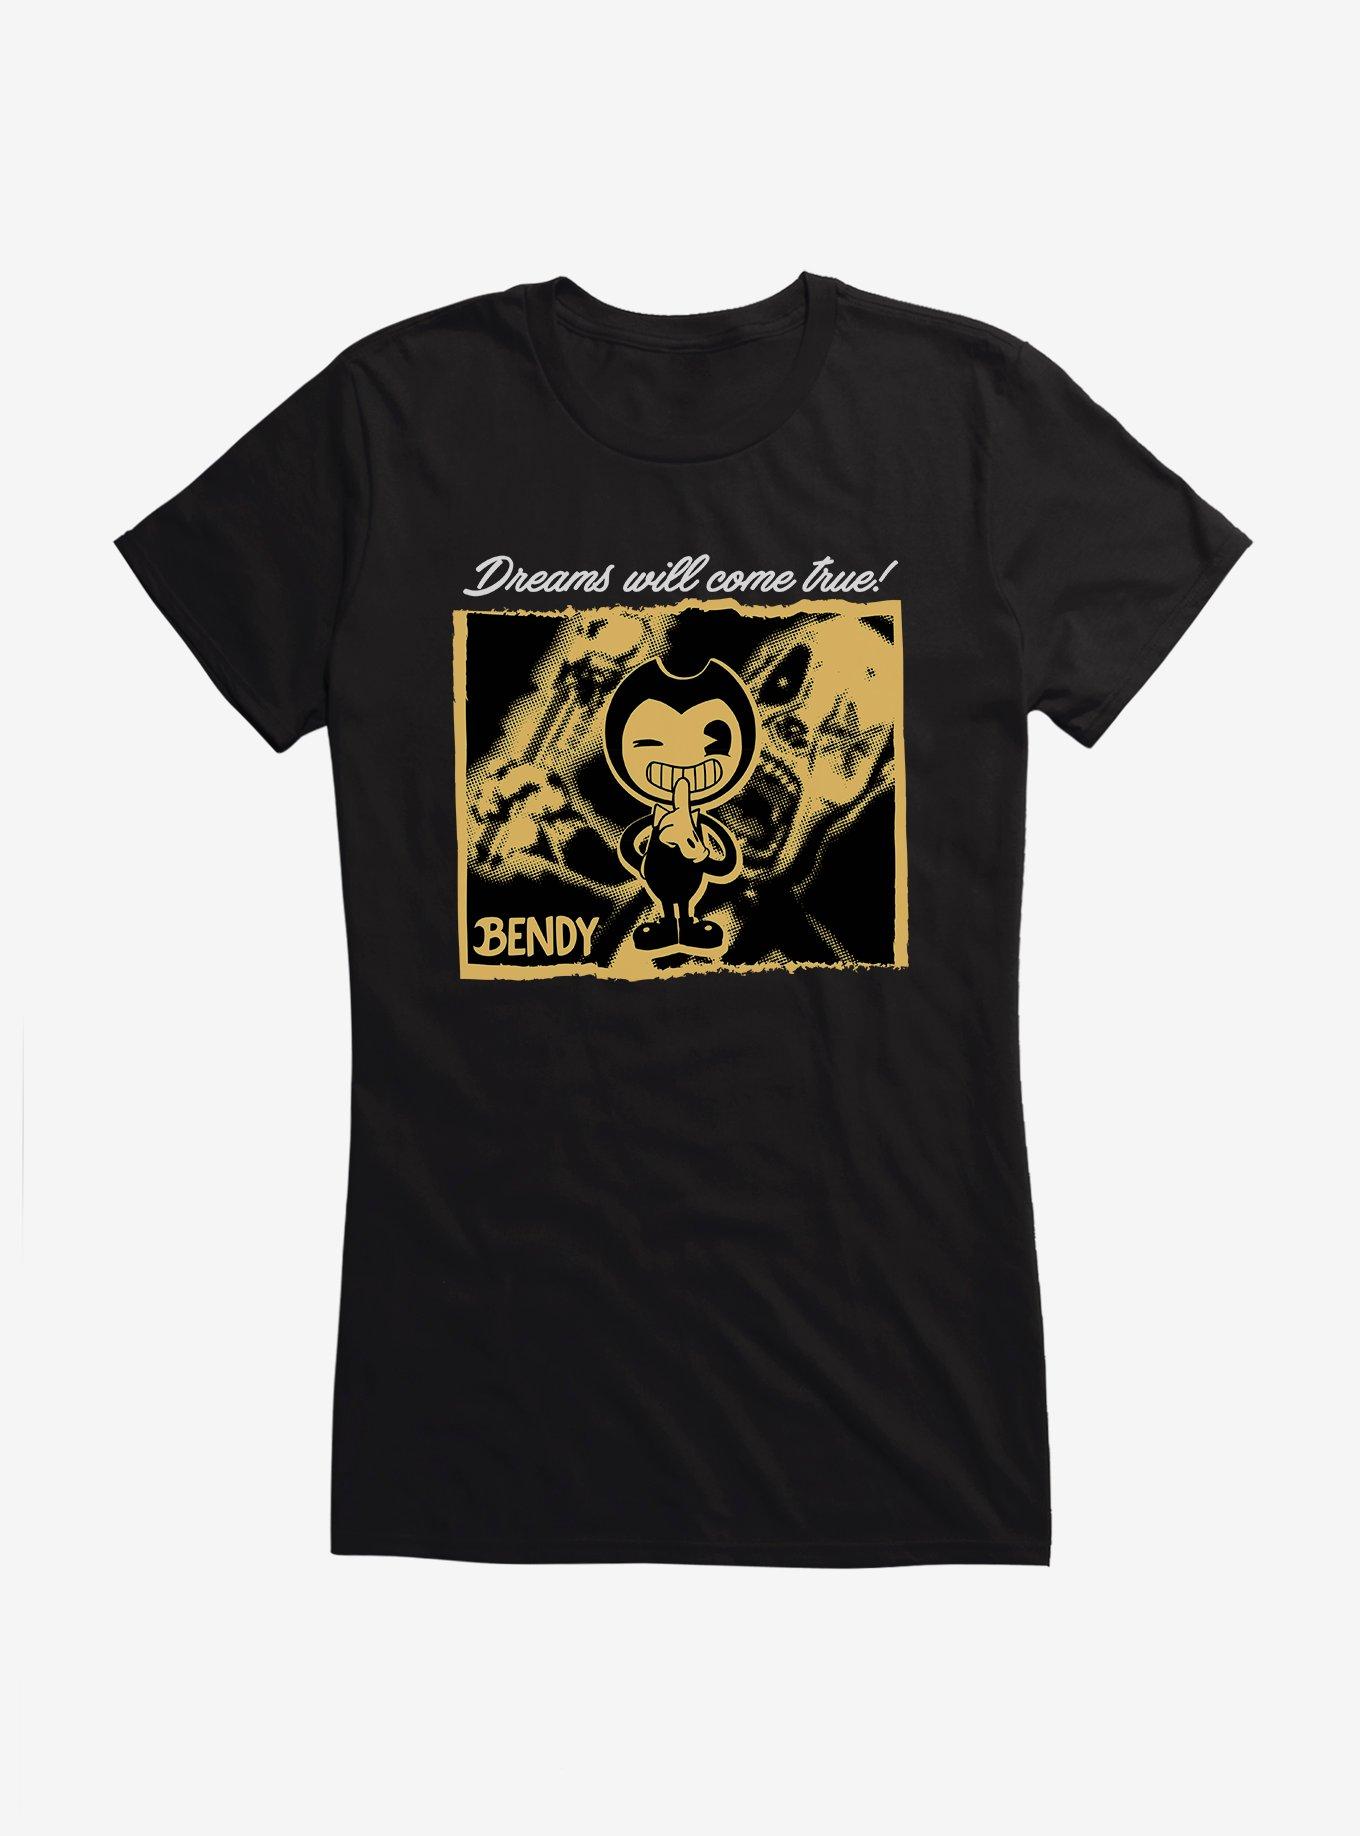 Bendy And The Ink Machine Dreams Will Come True! Girls T-Shirt, , hi-res